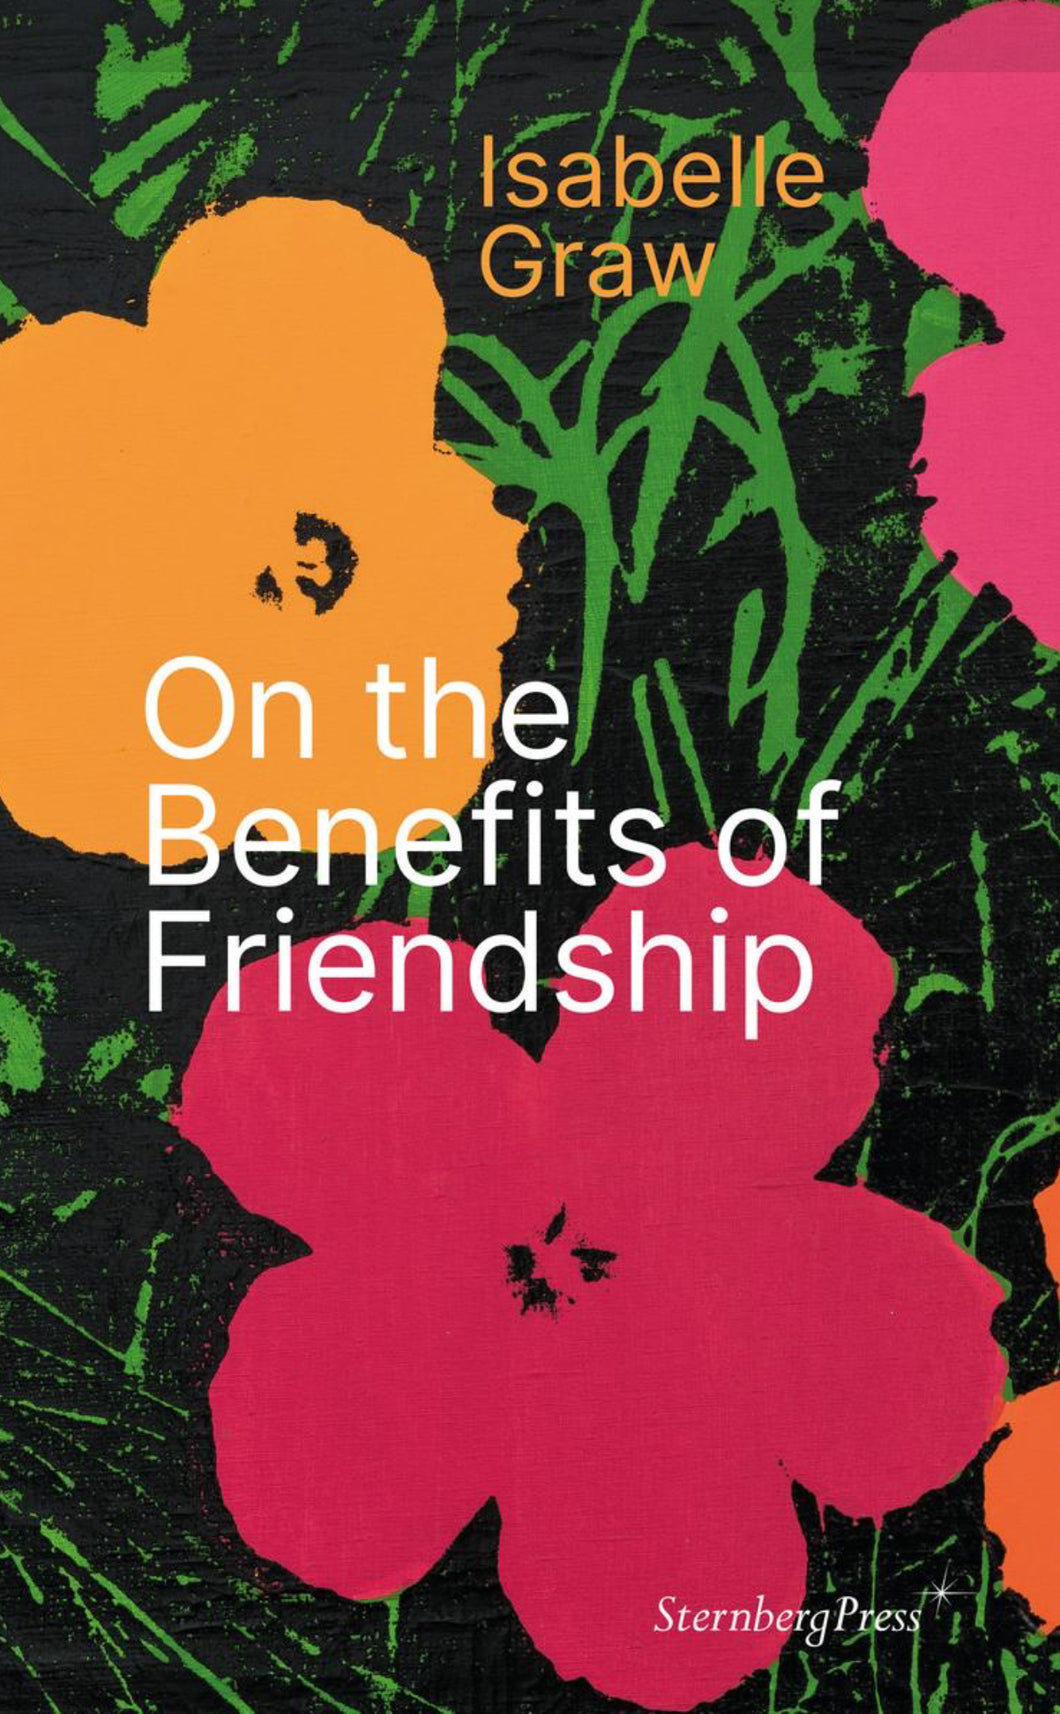 Basket Books: “On the Benefits of Friendship” Isabelle Graw